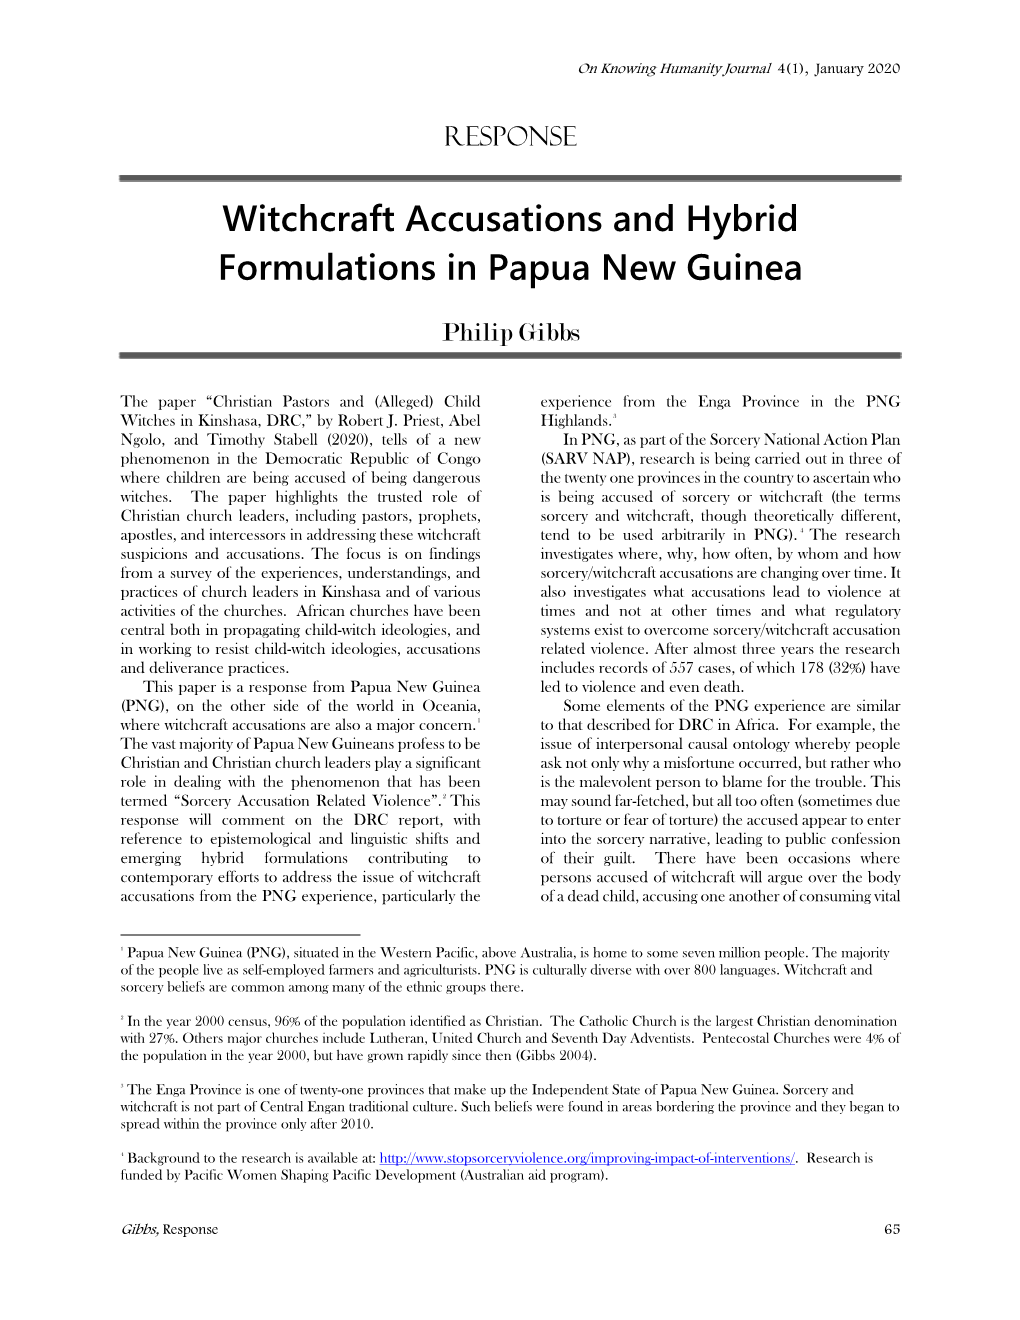 Witchcraft Accusations and Hybrid Formulations in Papua New Guinea